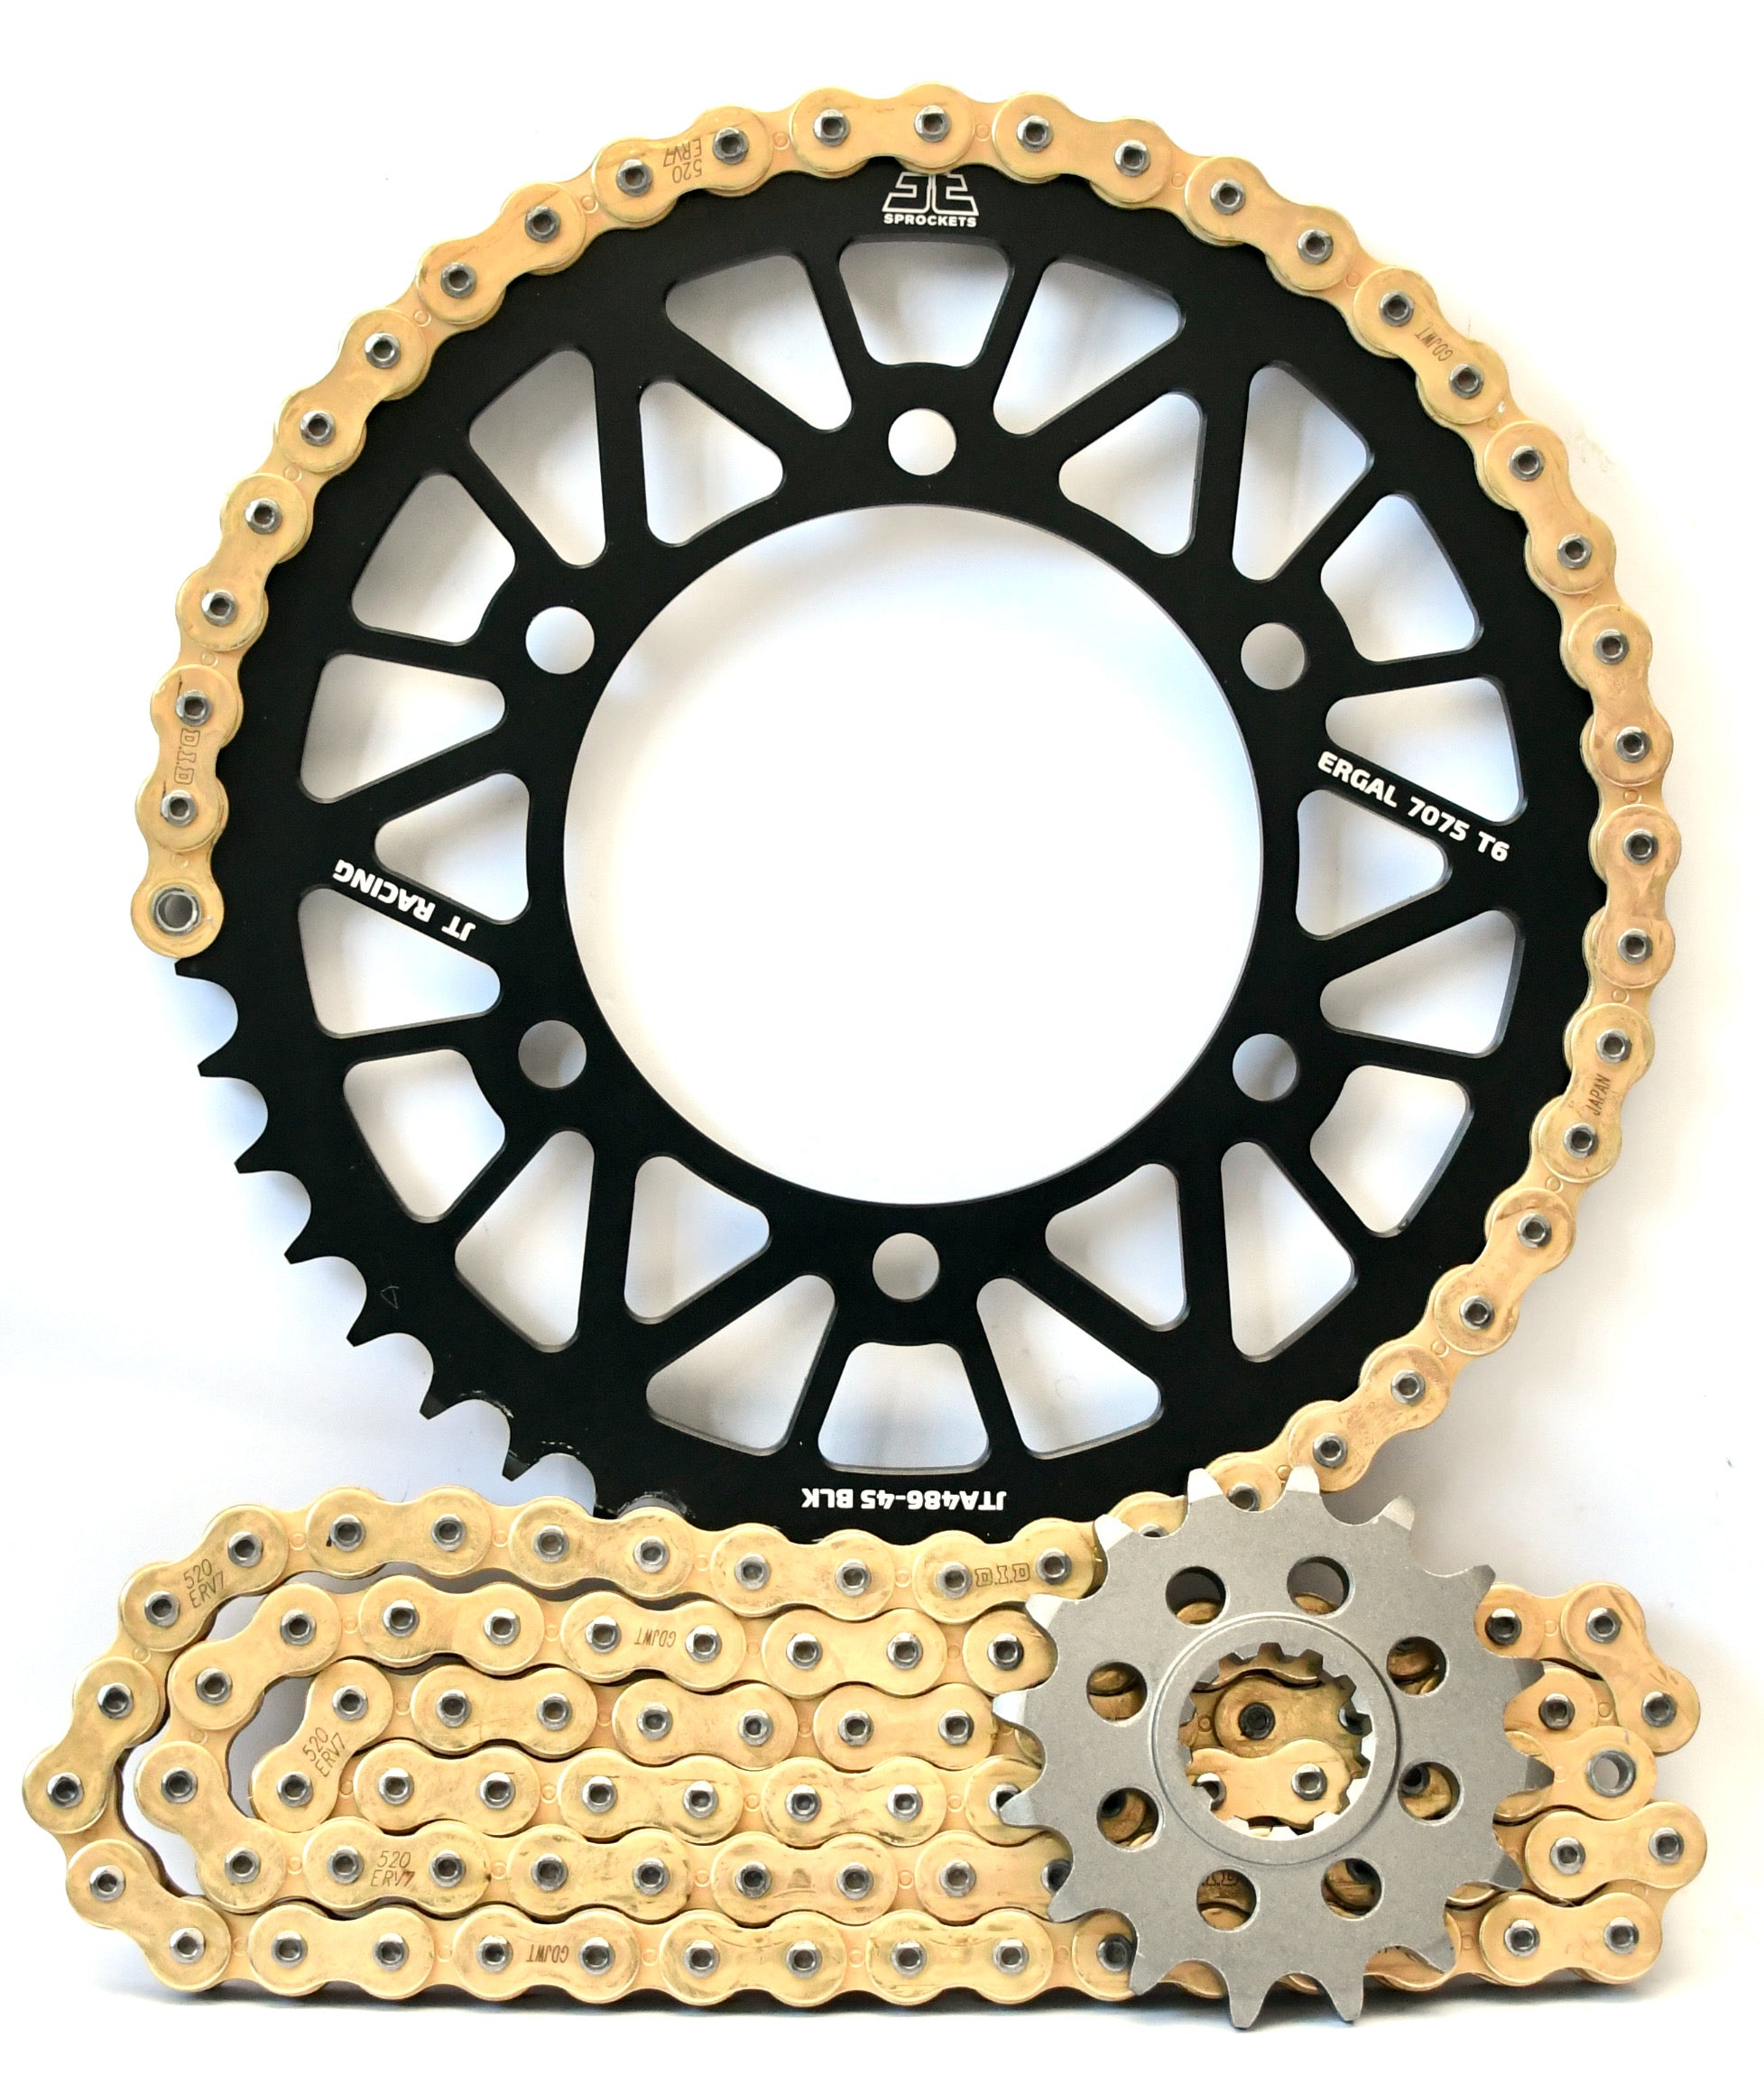 JT Racelite and DID 520 Conversion Chain & Sprocket Kit for Kawasaki ZX-10R 2016-2020 - Standard Gearing